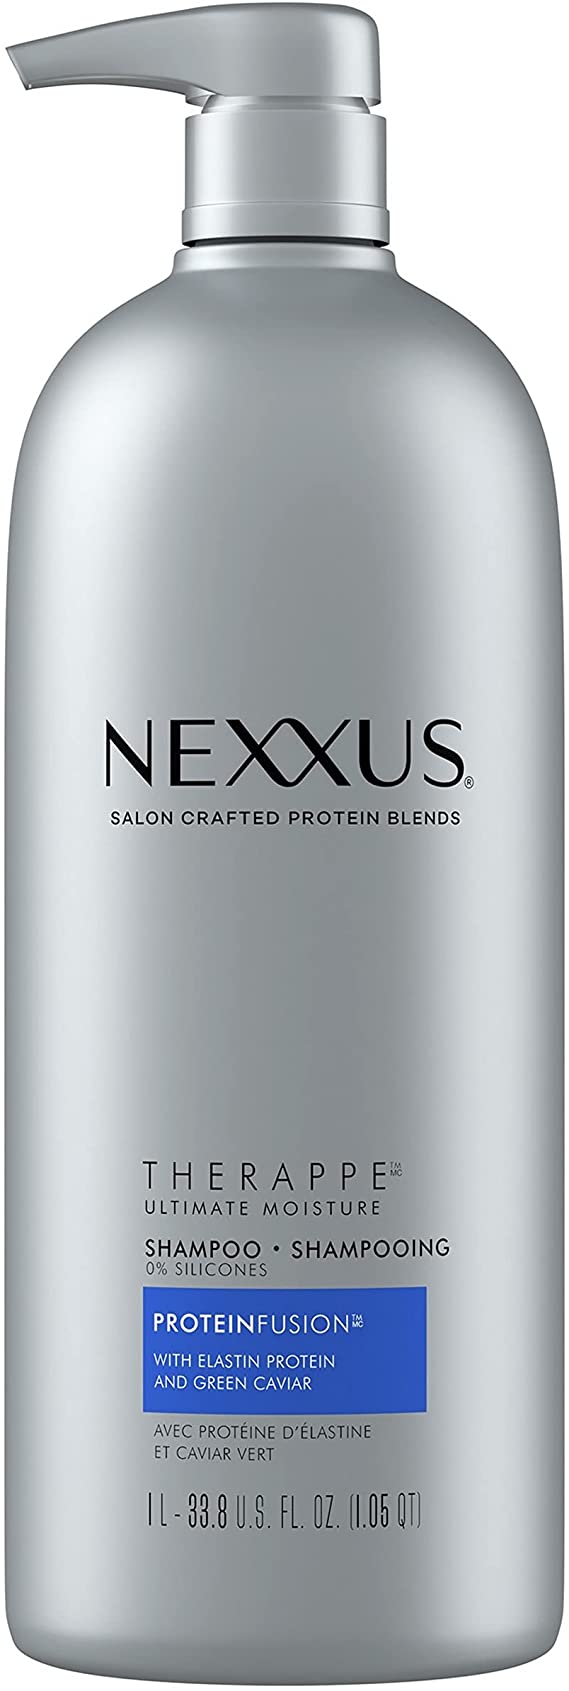 Nexxus Therappe Ultimate Moisture Shampoo for Dry Hair with ProteinFusion Blend of Elastin Protein and Green Caviar 1 L